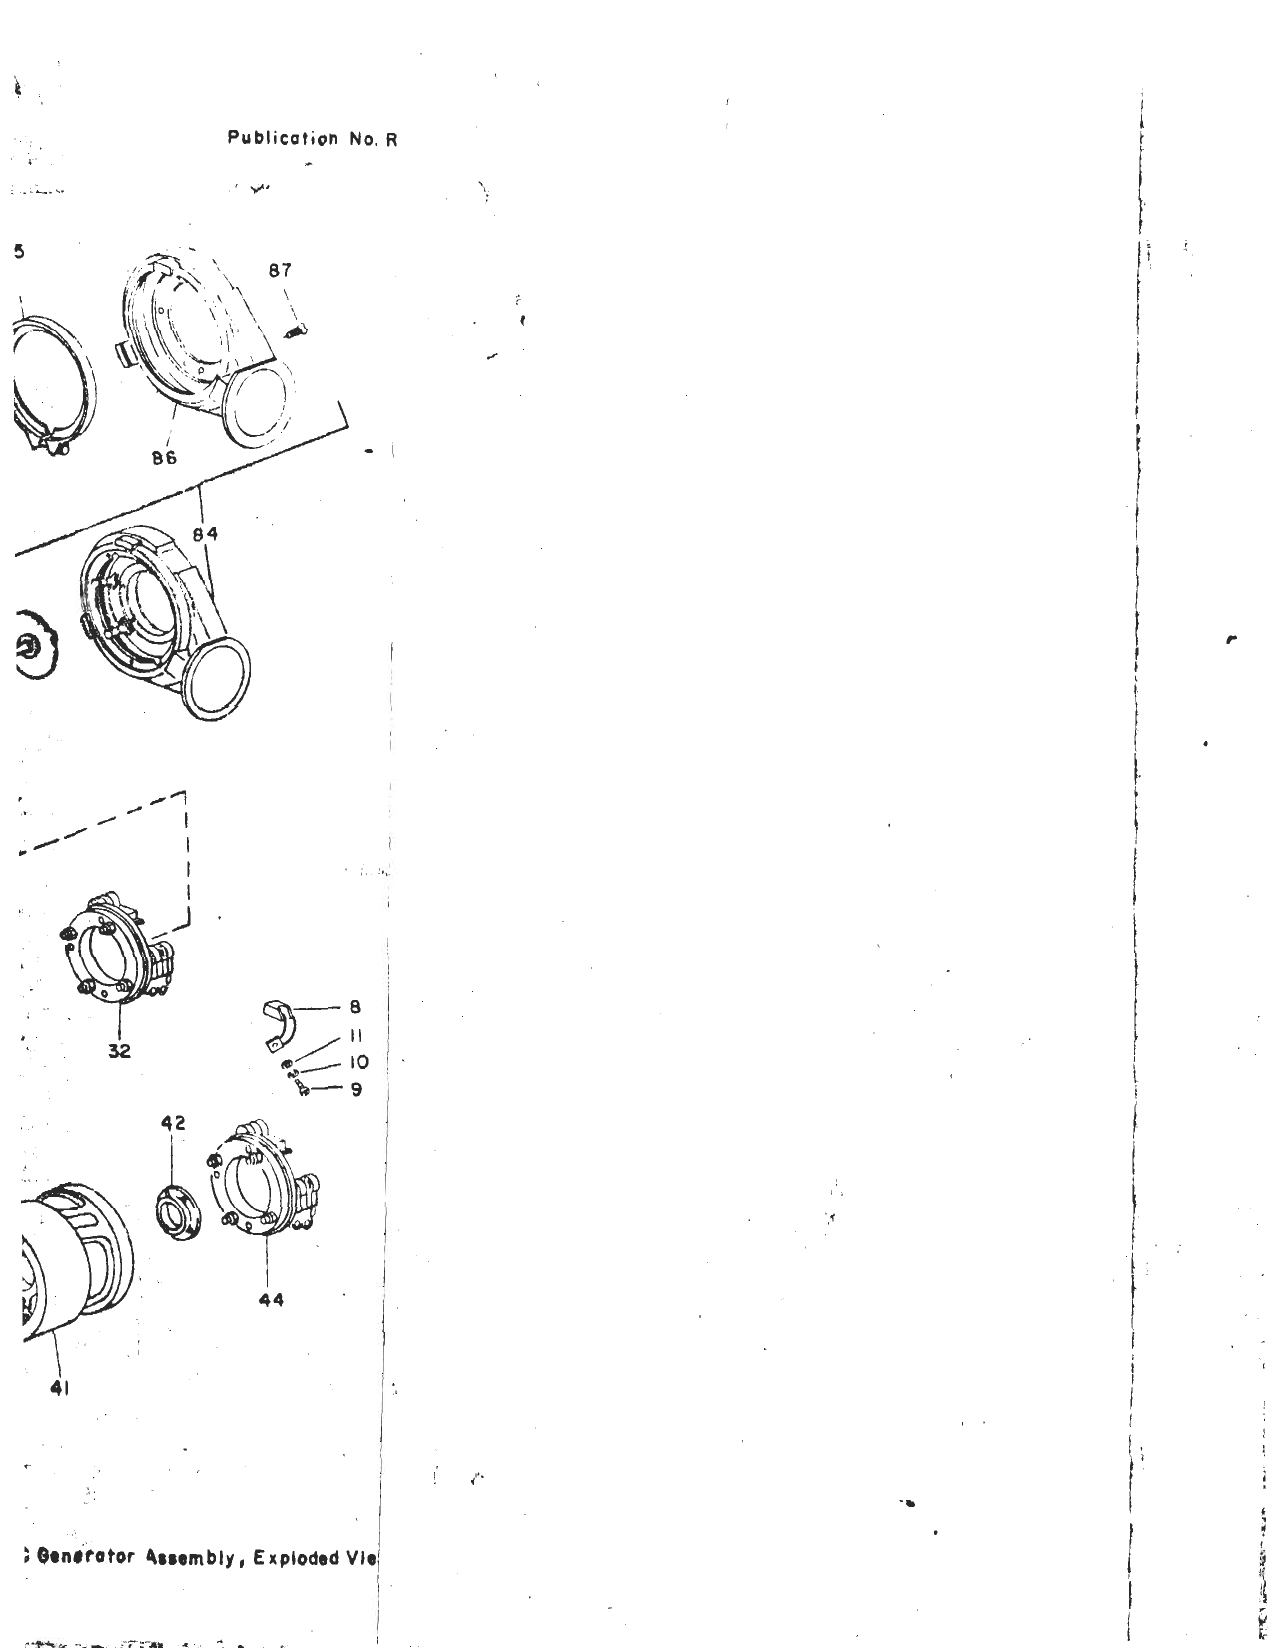 Sample page 5 from AirCorps Library document: Illustrated Parts List for DC Generator - Type 30B58-3-A, 30B58-3-B 